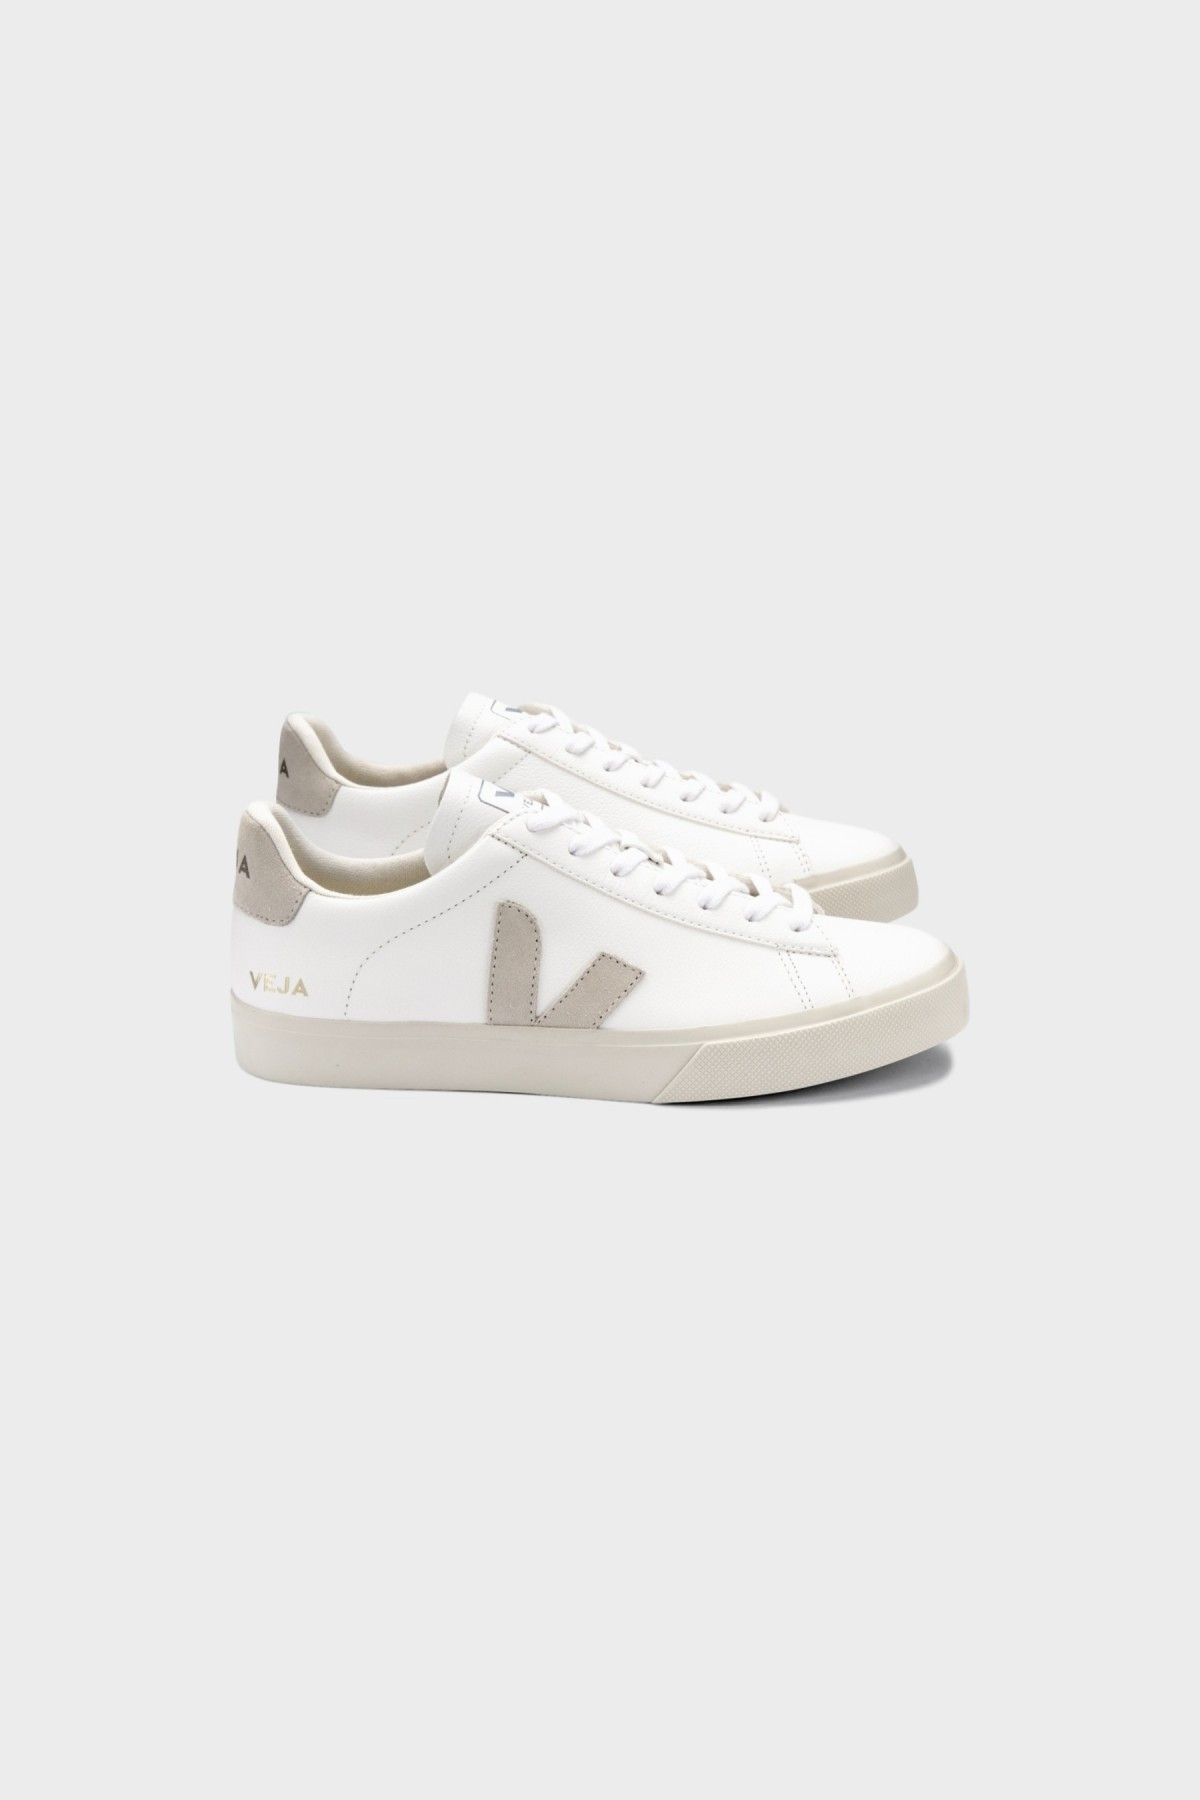 Veja Campo Chromefree in Extra White Natural Suede